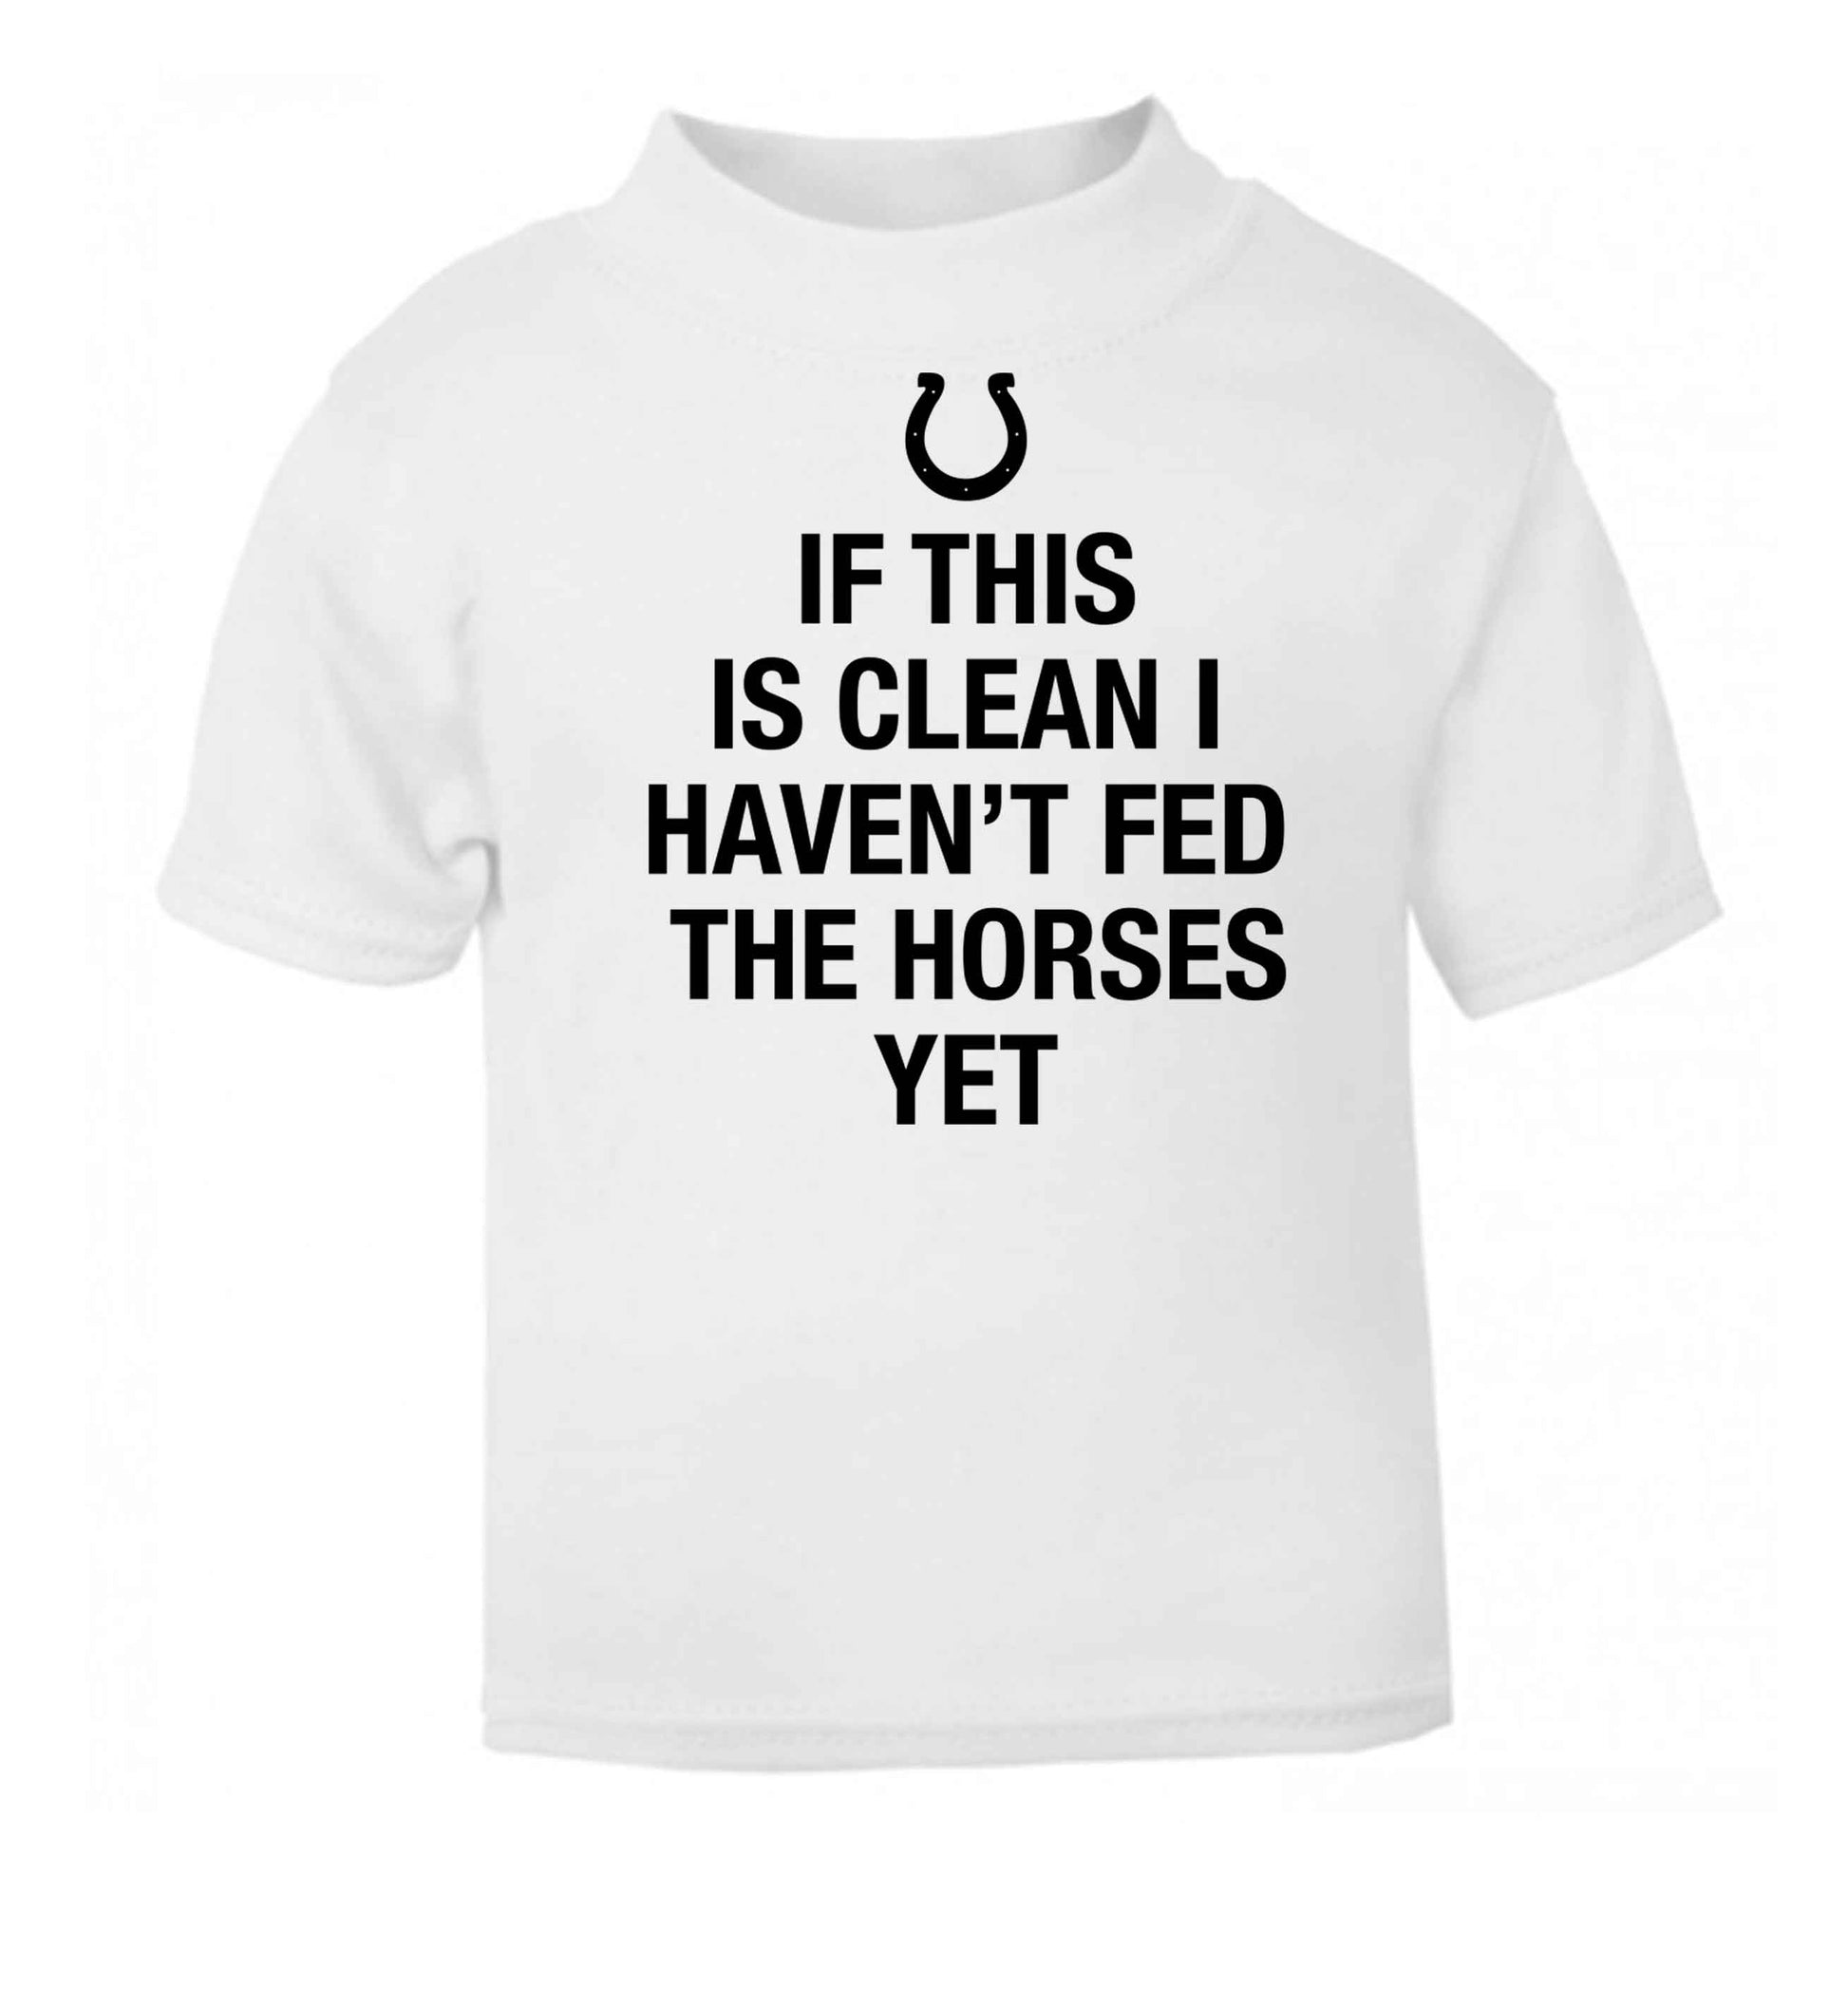 If this isn't clean I haven't fed the horses yet white baby toddler Tshirt 2 Years